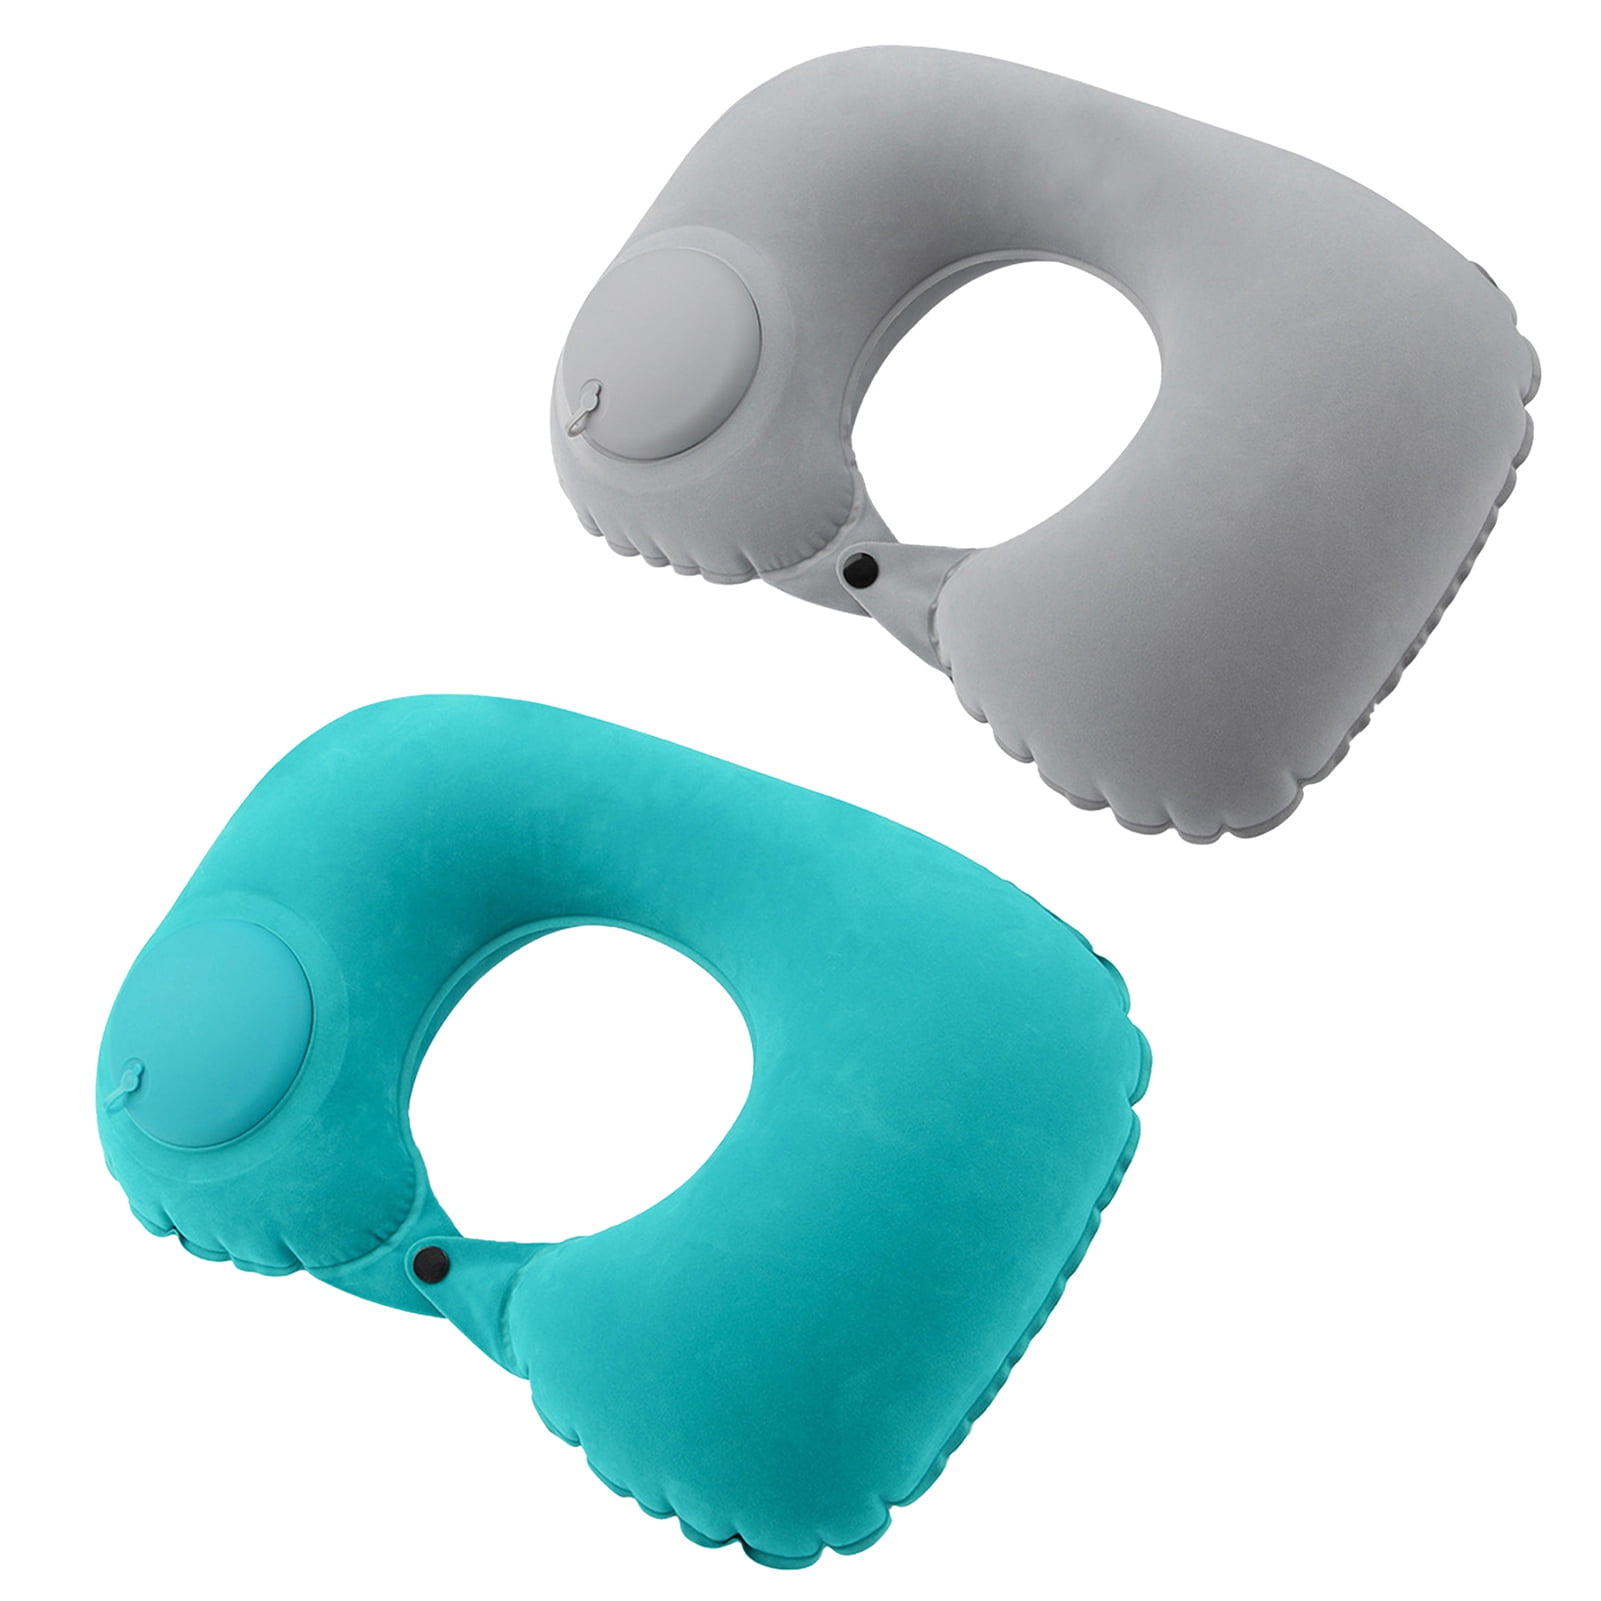 Homelove Inflatable Neck Travel Pillow,Compressible , Portable and Compact  Air Neck Support Pillow for Airplanes, Train, Car, Home and Office,Grey 